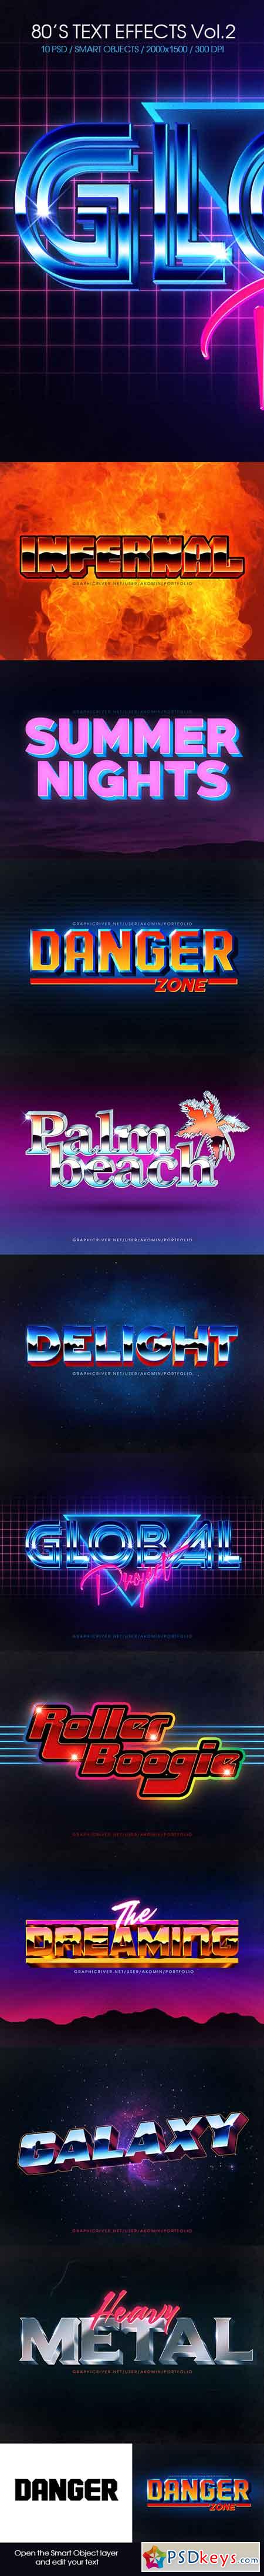 80s Text Effects Vol.2 22668969